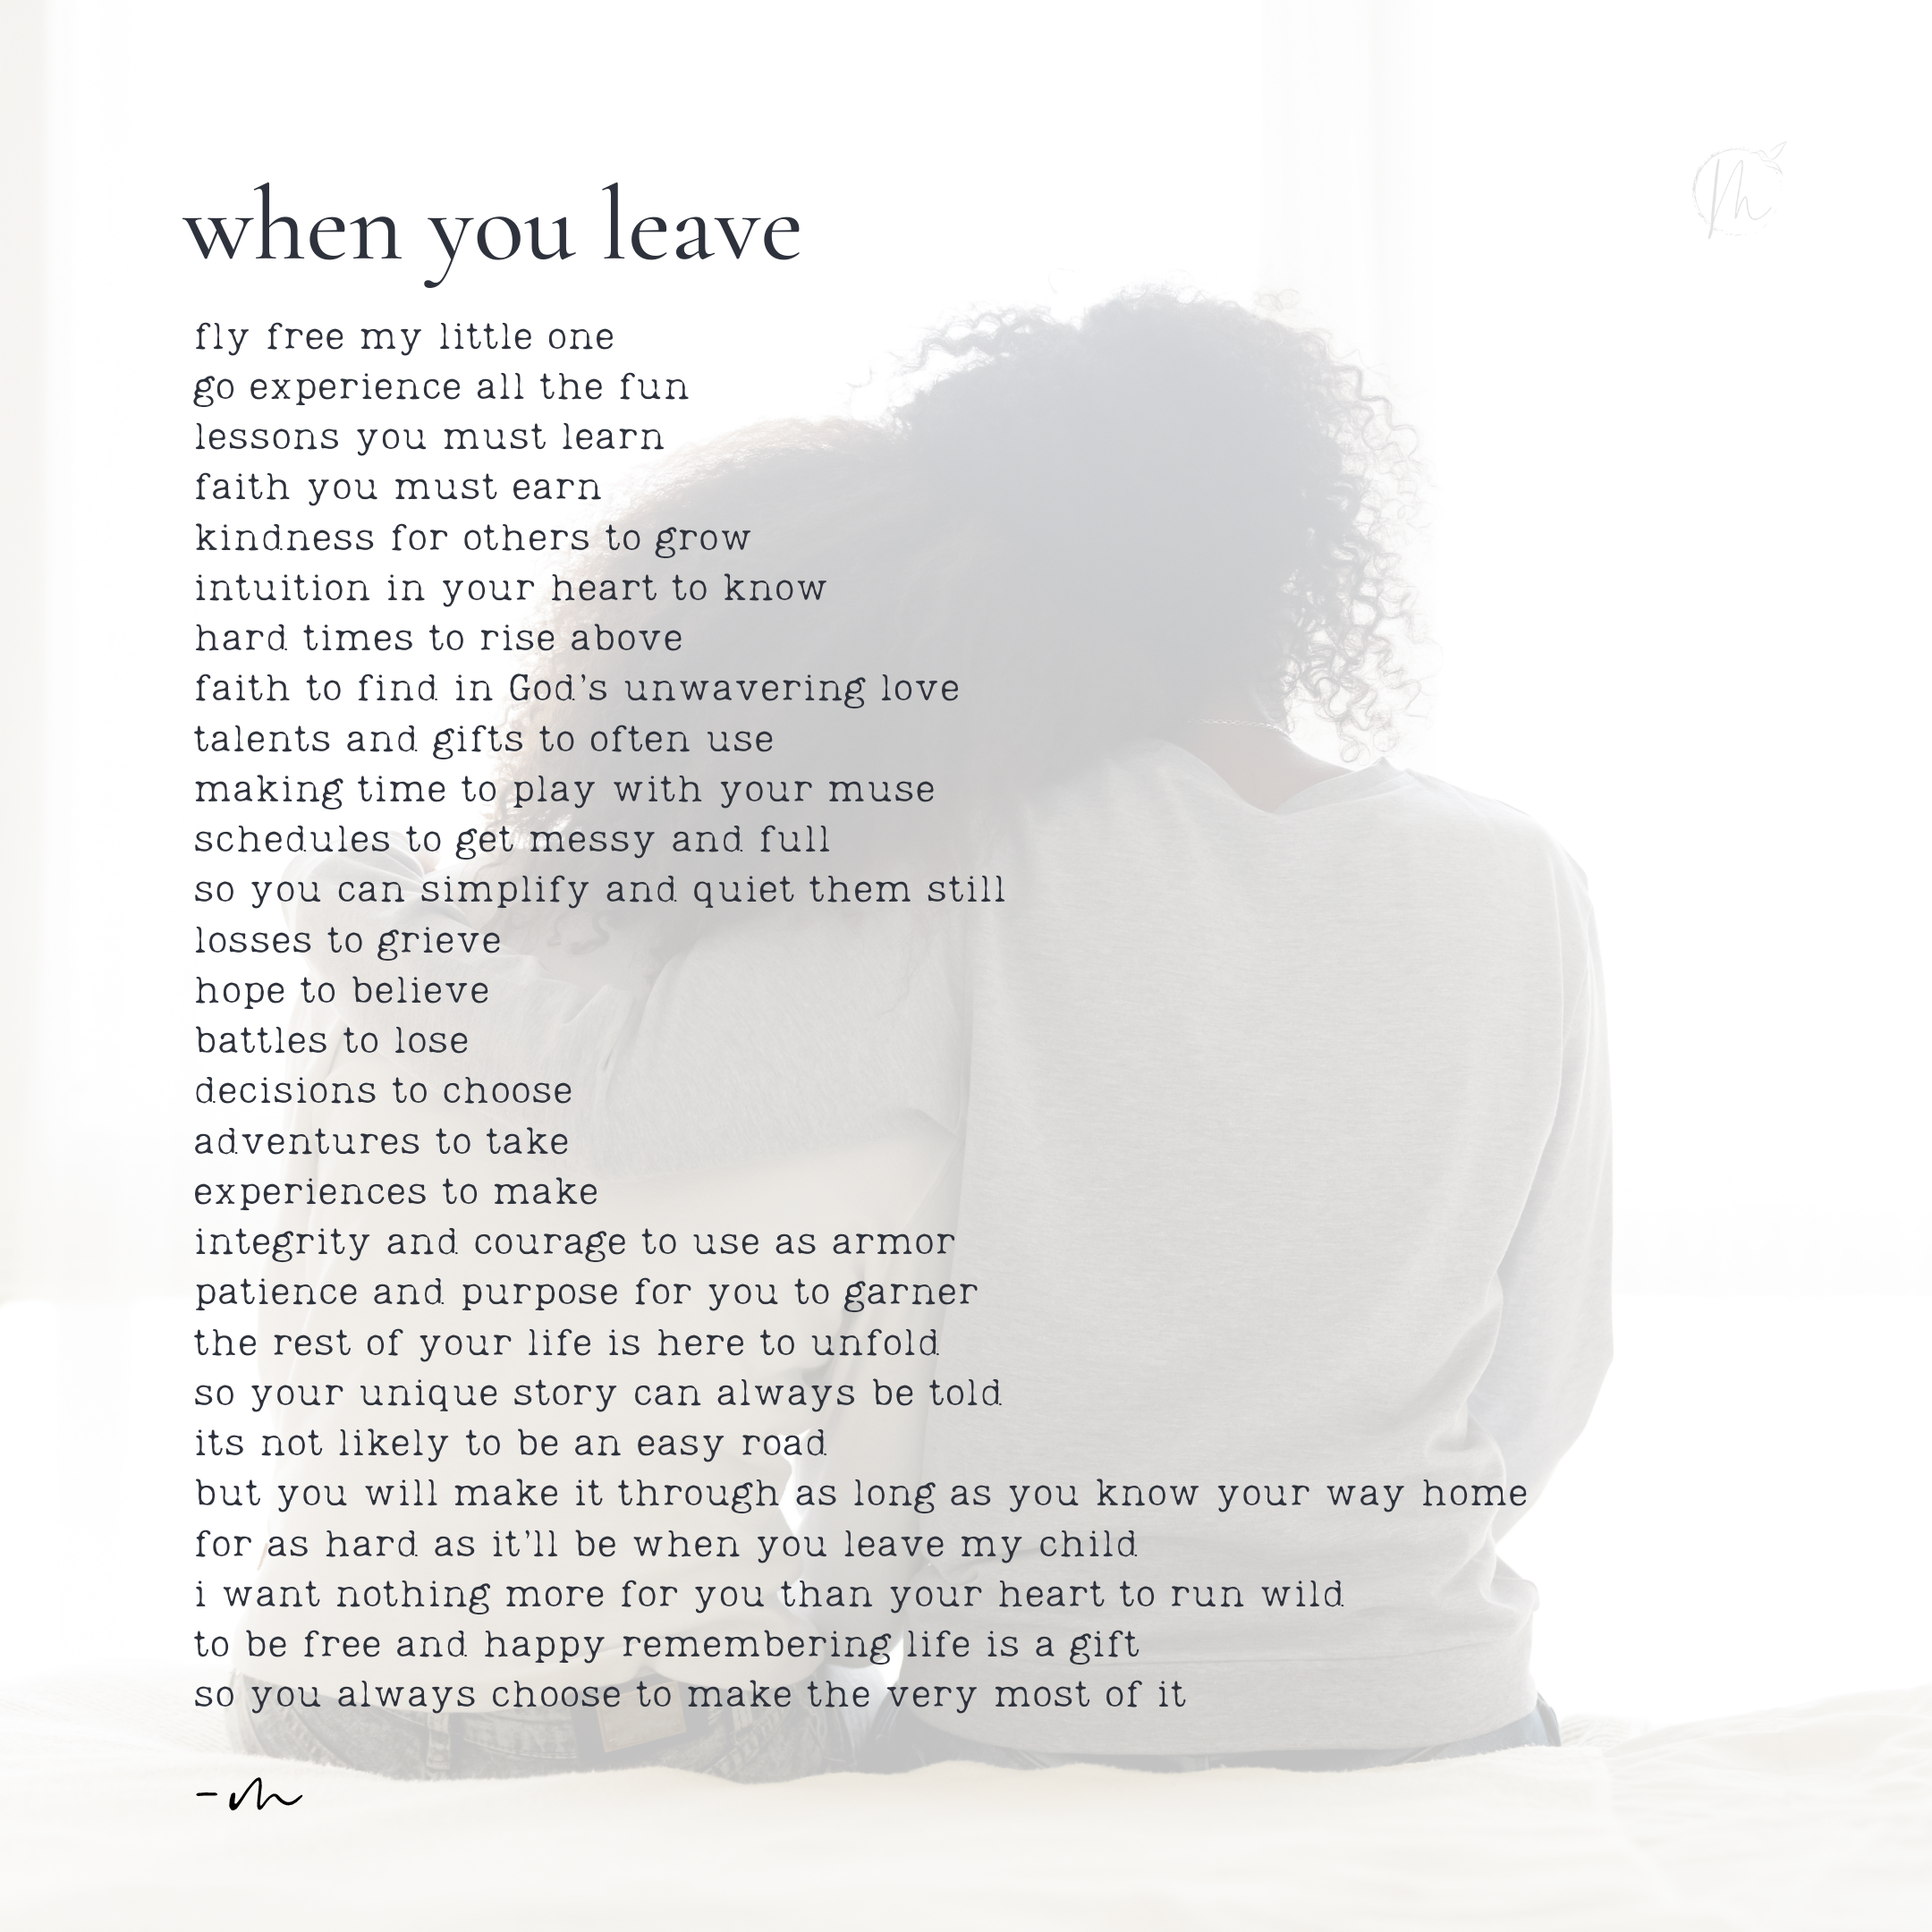 poem - when you leave with photo.png